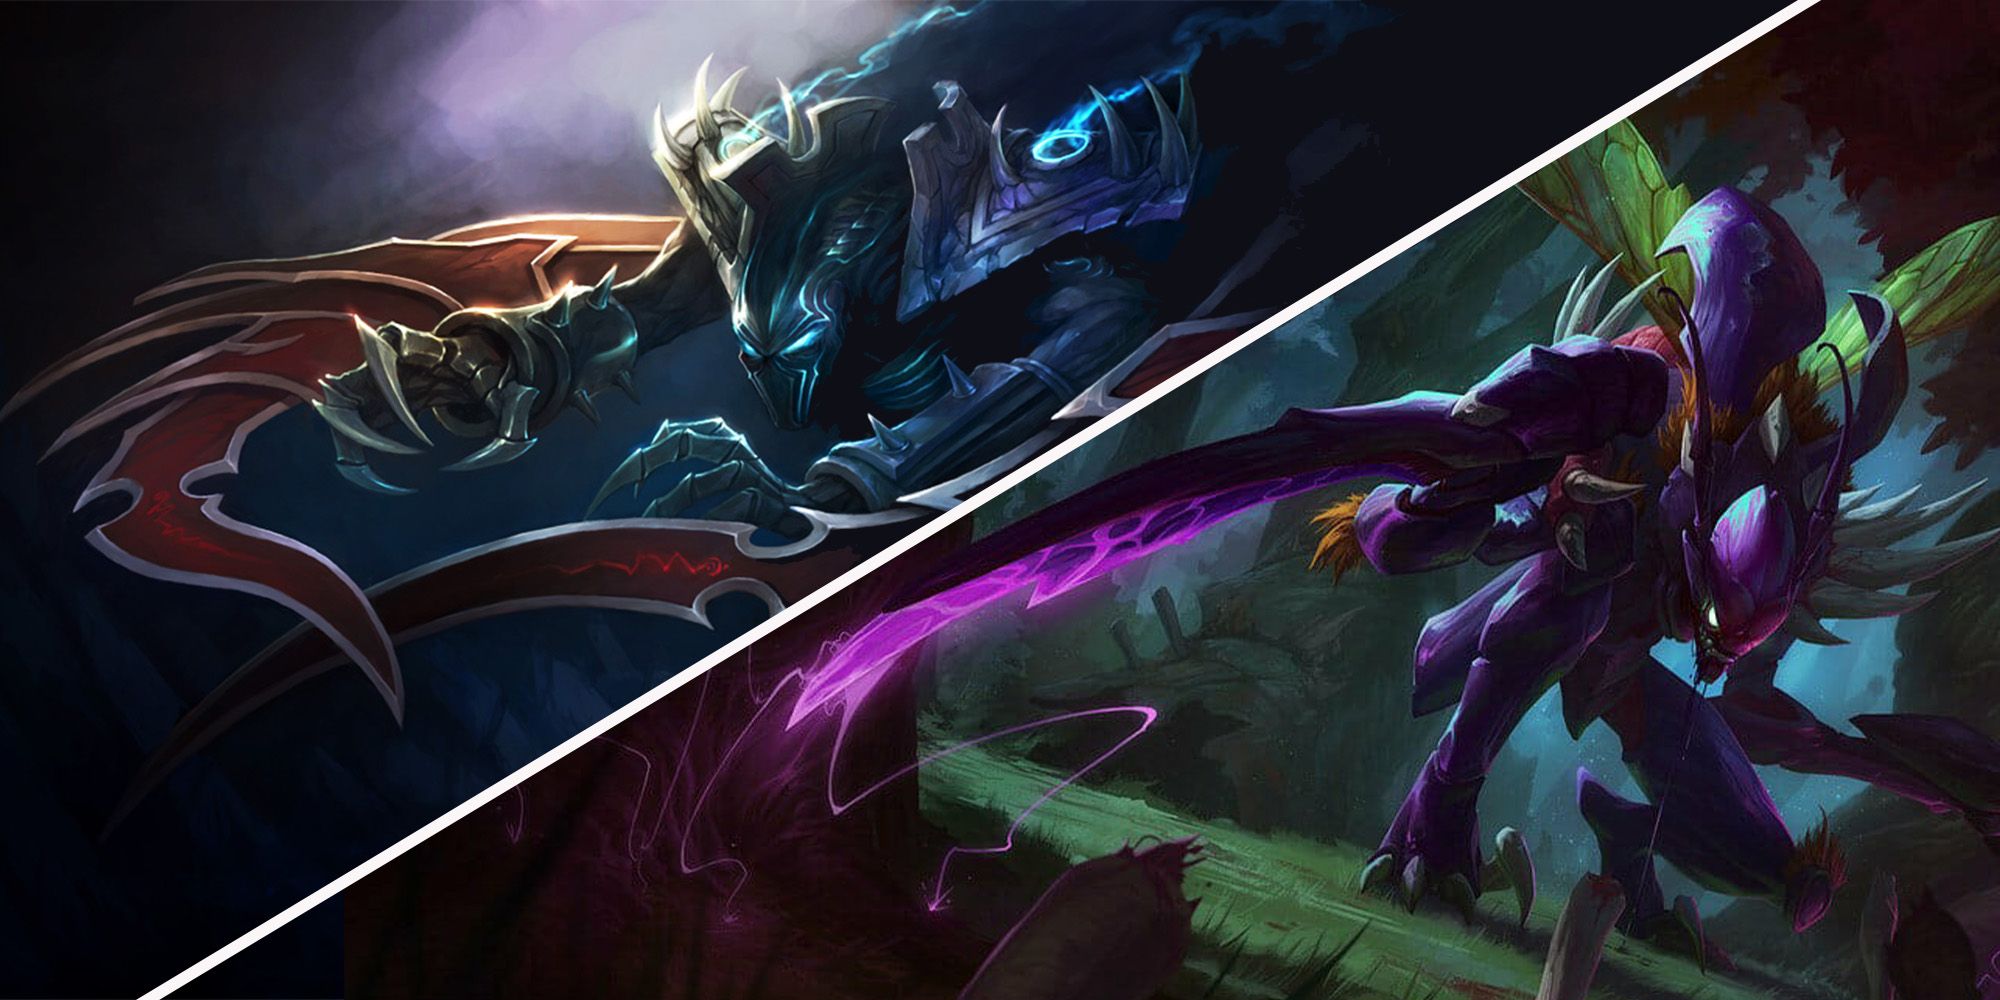 Khazix and Nocturne from League of Legends